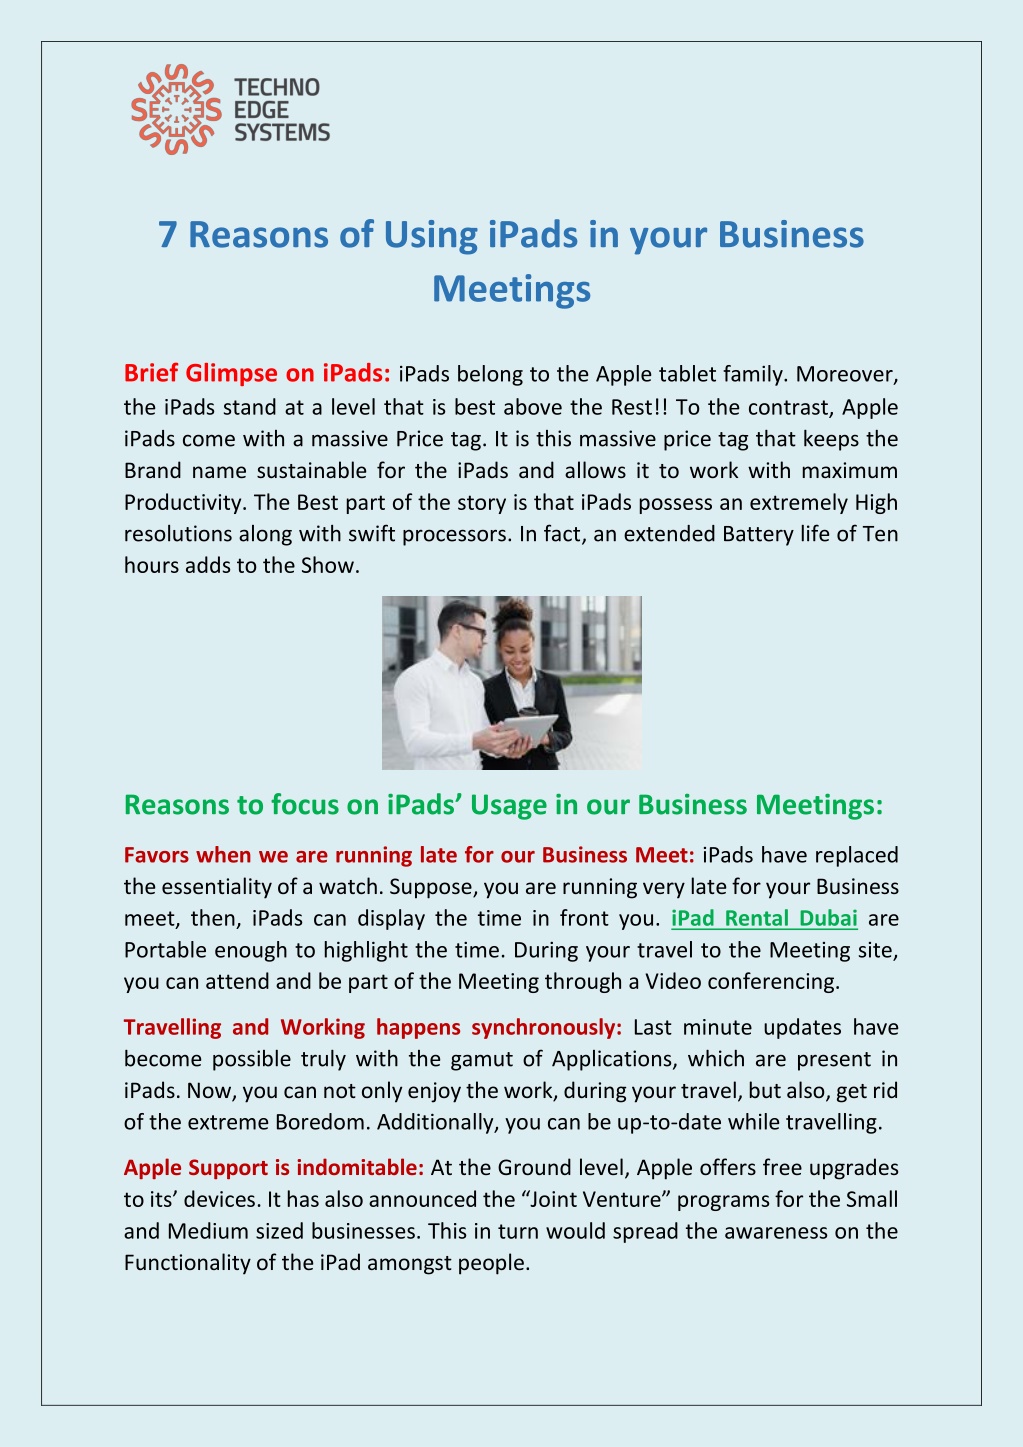 7 reasons of using ipads in your business meetings l.w